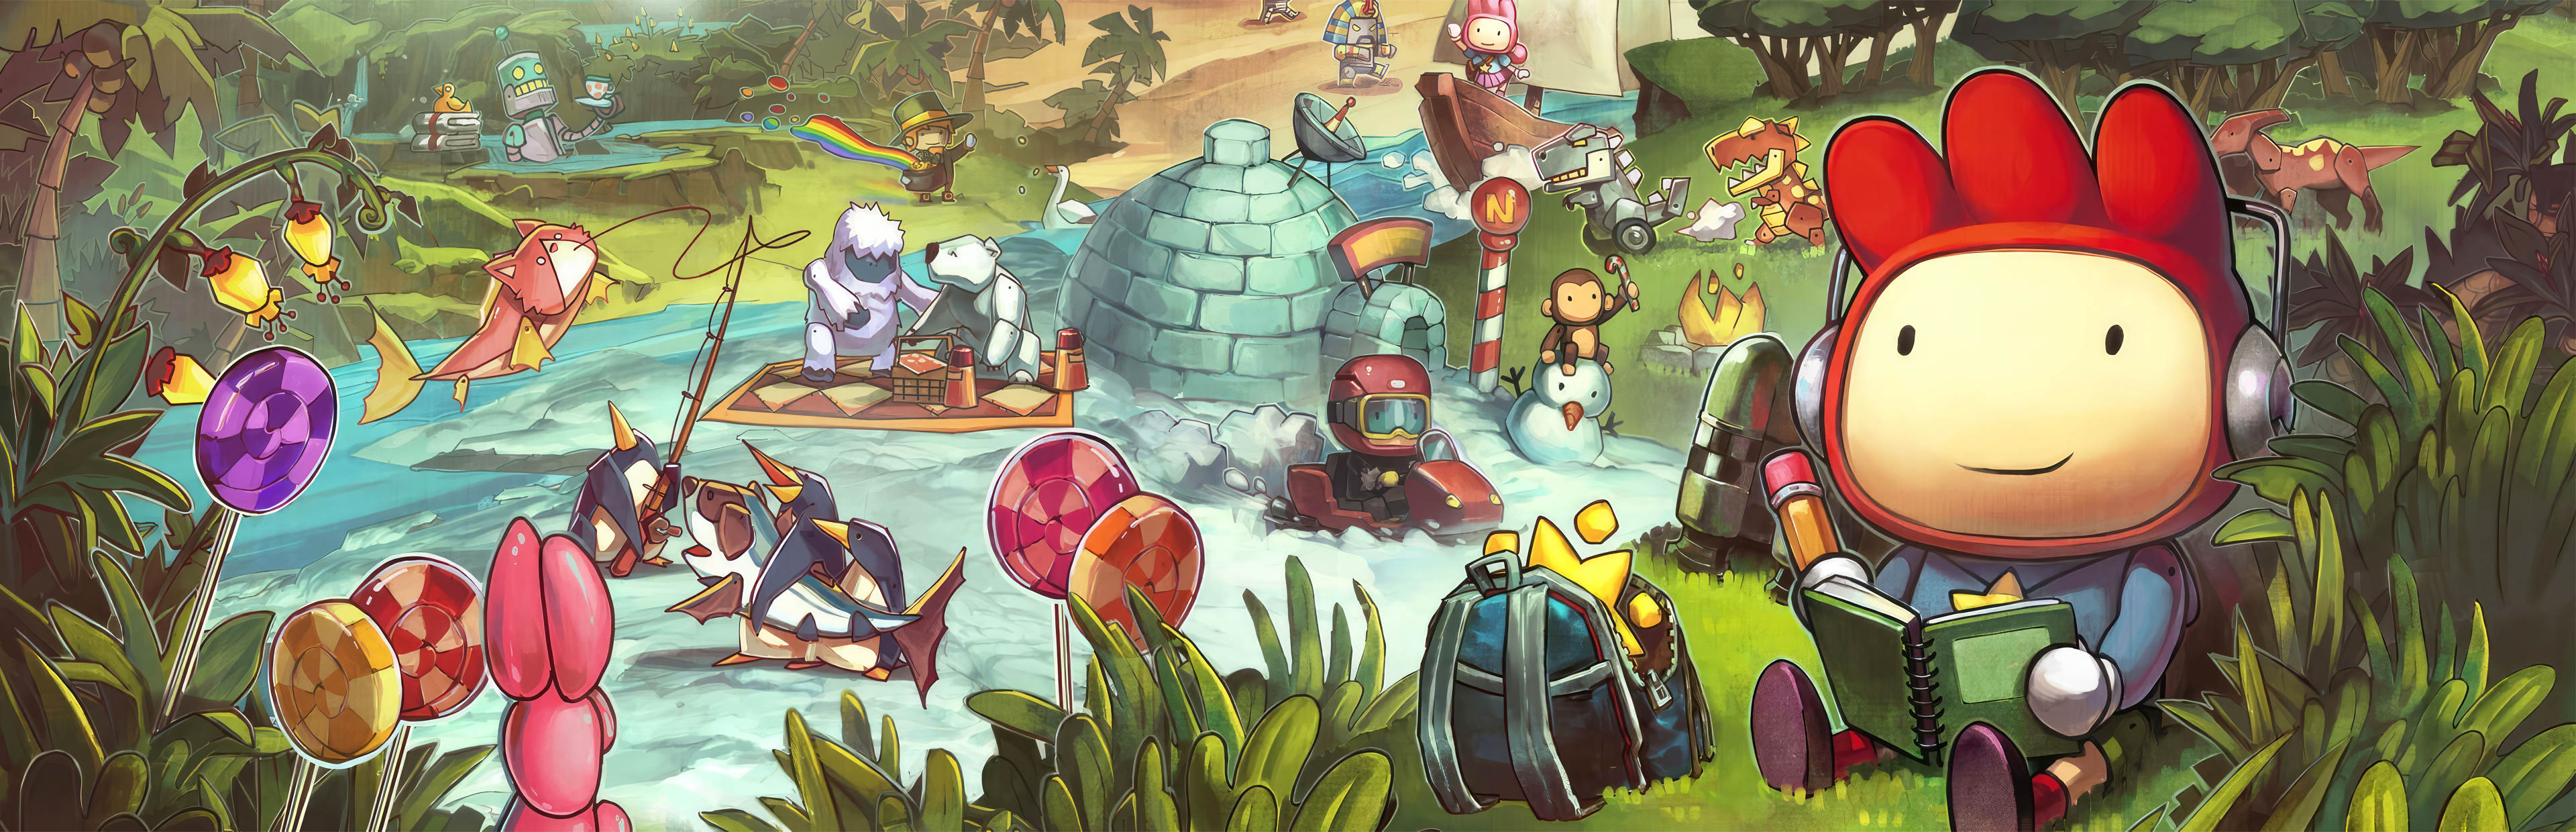 Steam Workshop::The Scribblenauts Unlimited Indie Cross Nightmare Collection